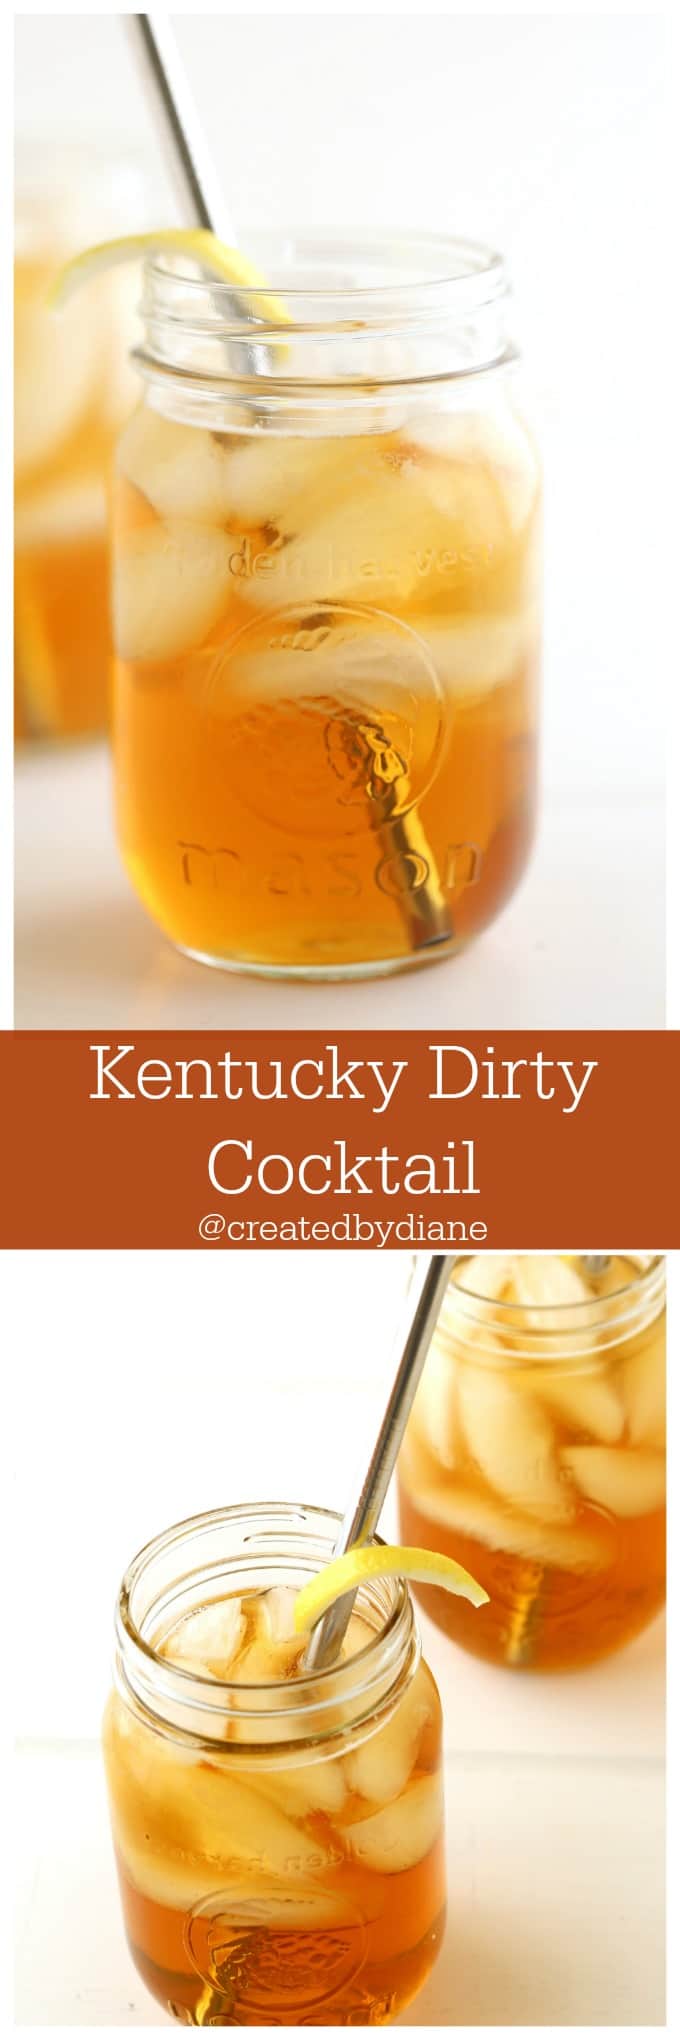 Kentucky Dirty Cocktail the PERFECT drink! @createdbydiane